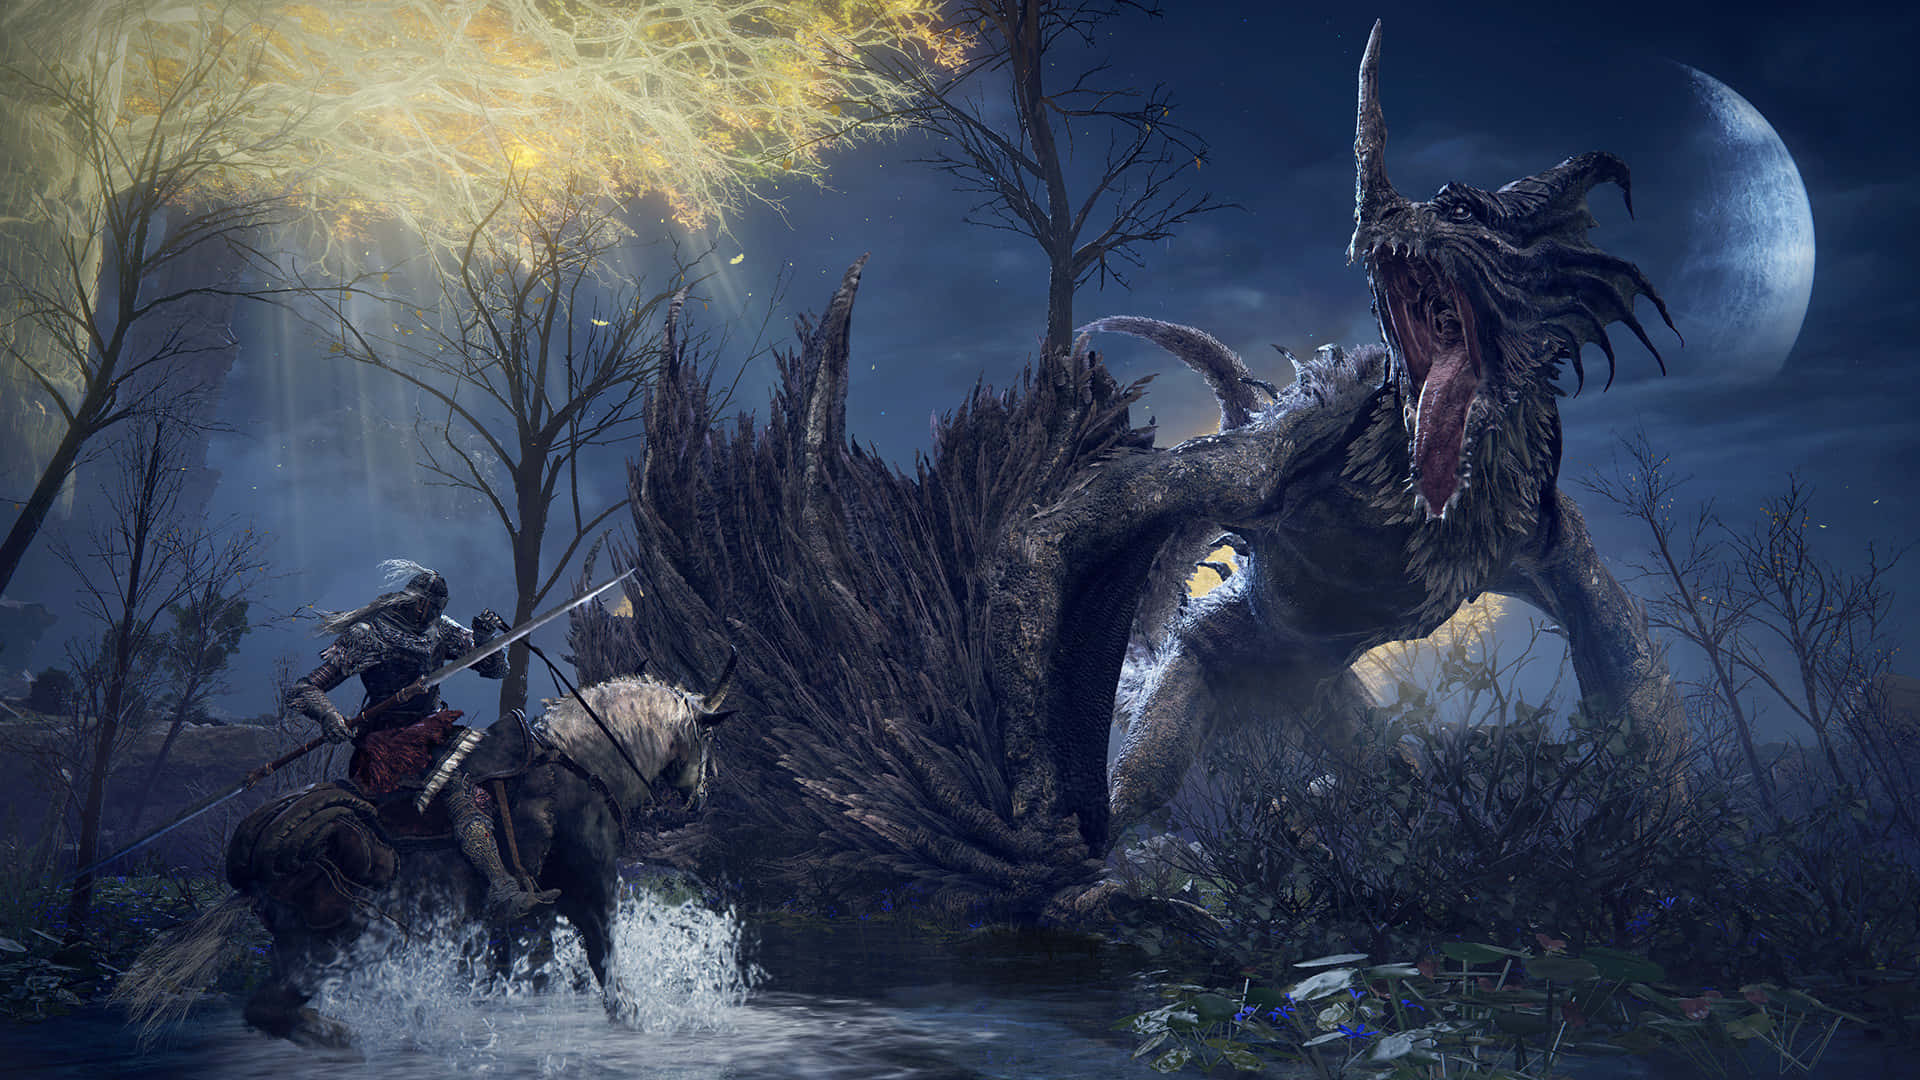 A Man Riding A Horse In The Woods Next To A Dragon Background